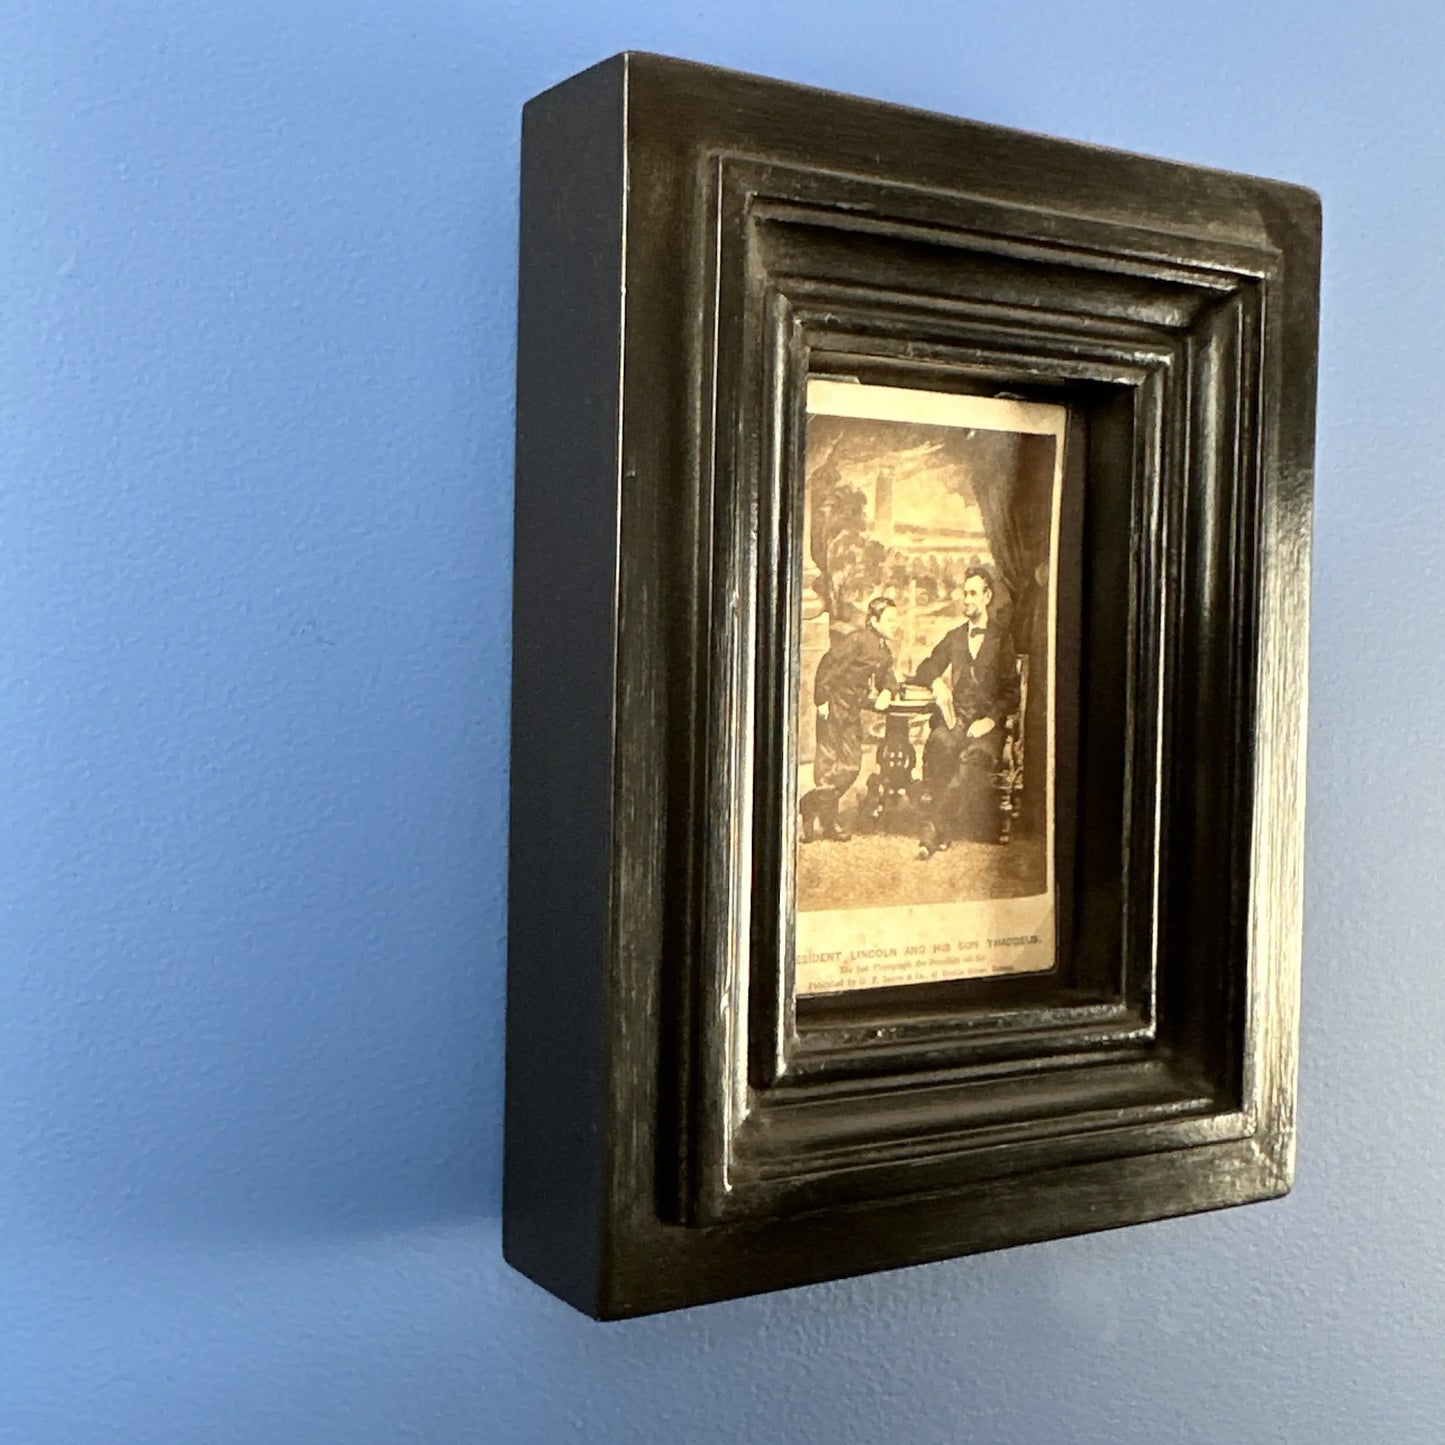 CDV of President Lincoln with Tad —  1865 — In a handmade, solid wood frame